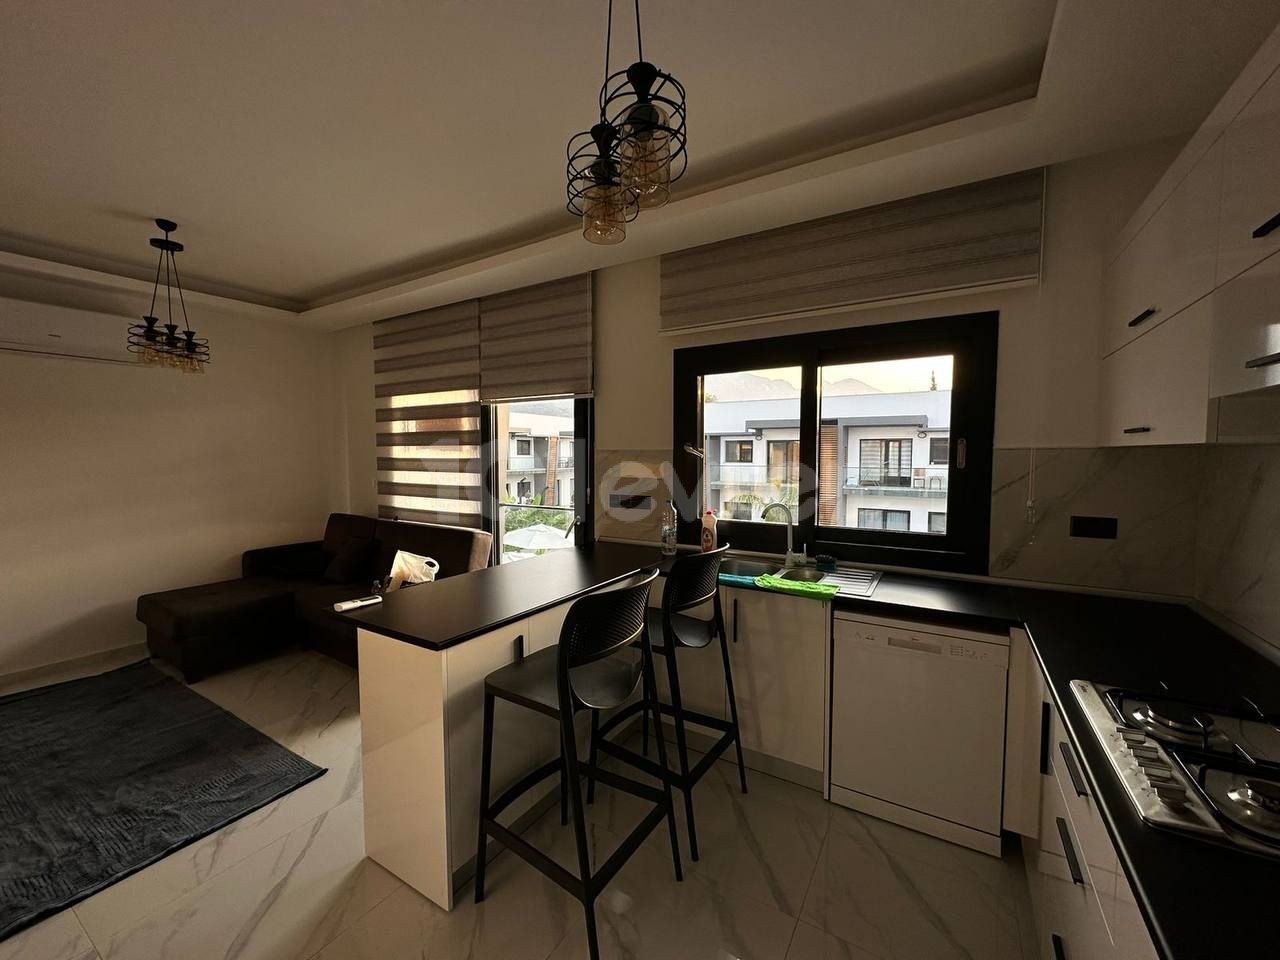 *** 1+1 FLAT FOR RENT WITH SHARED POOL IN ALSANCAK, WALKING DISTANCE TO THE SEA***